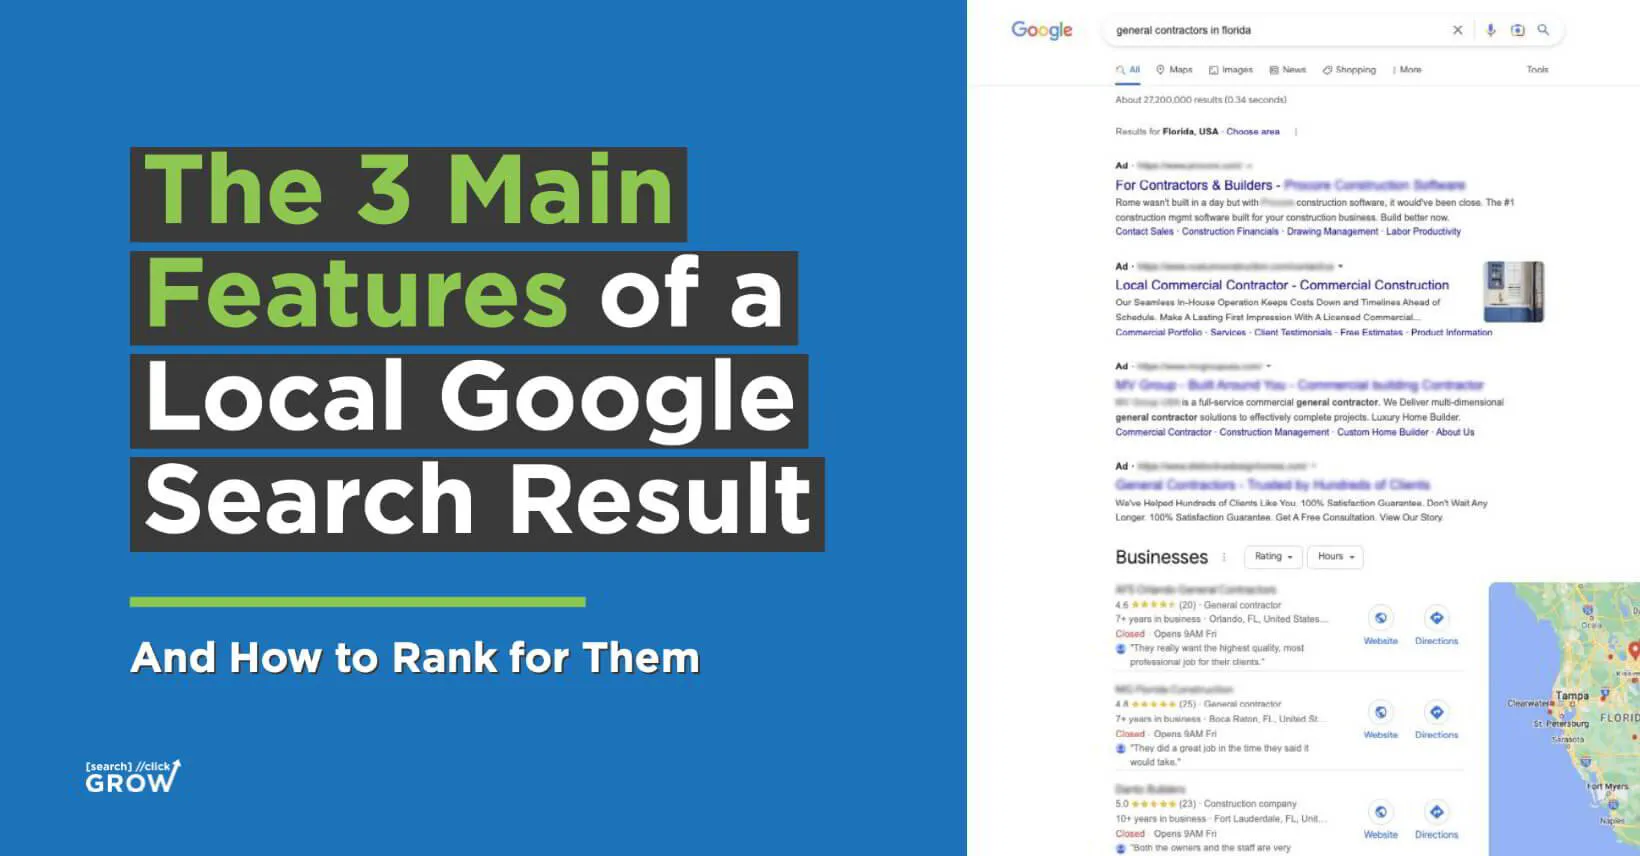 The 3 Main Features of a Local Google Search Result &amp; How to Rank for Them